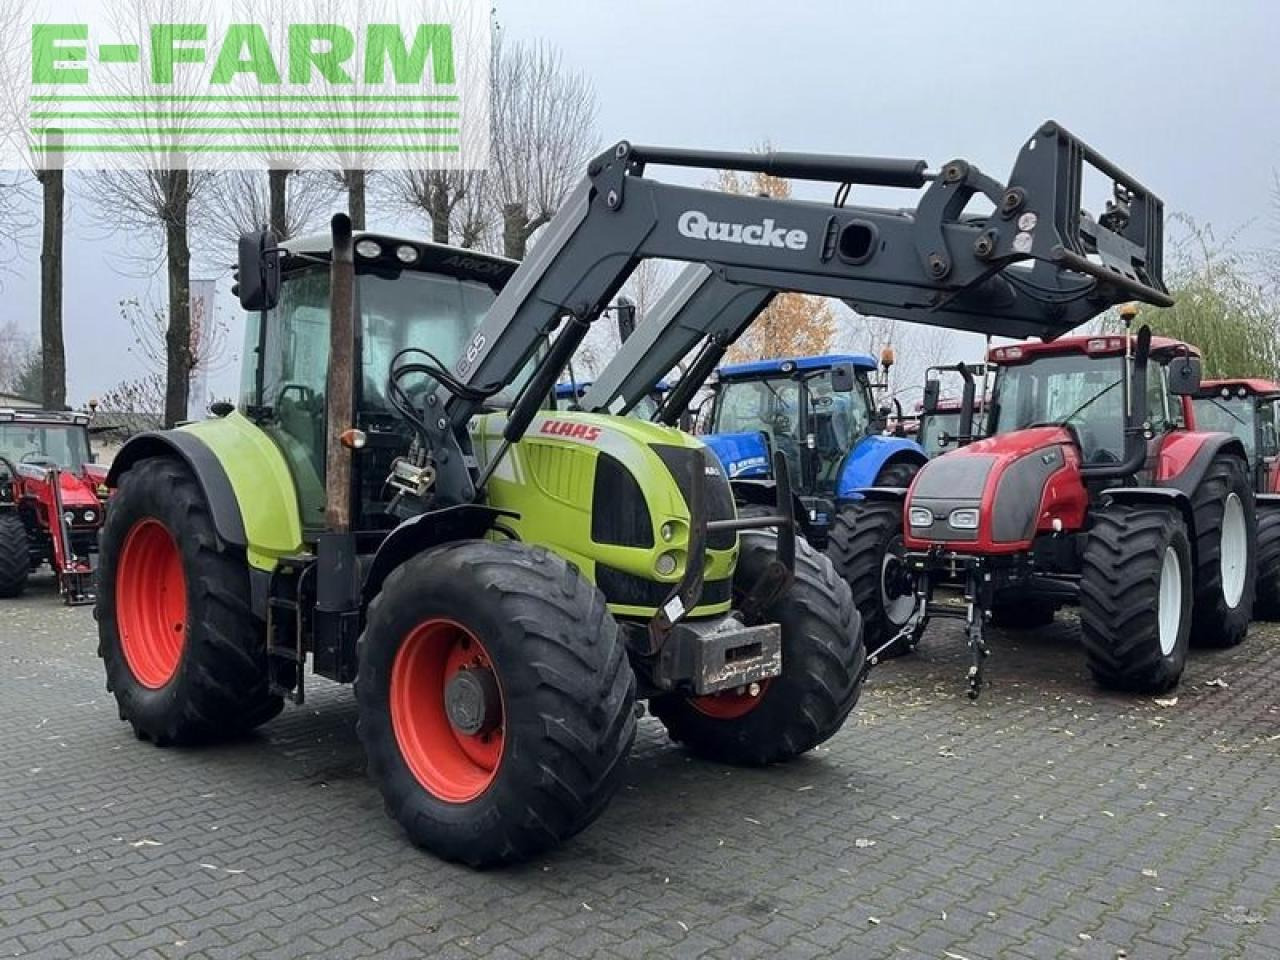 Tractor CLAAS arion 640 cis + quicke q65